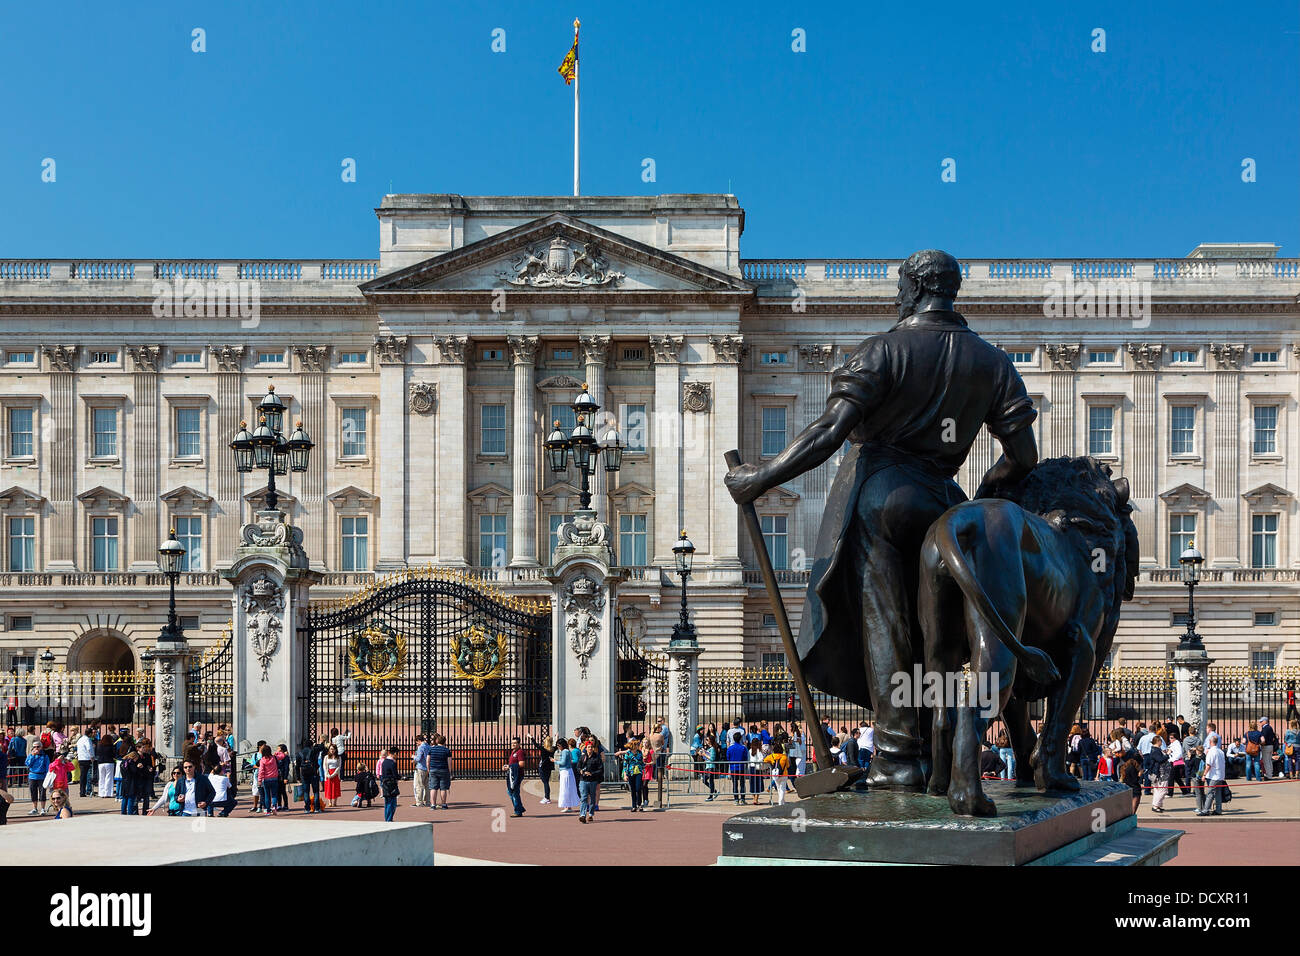 London, Victoria Memorial Front of Buckingham Palace Stock Photo